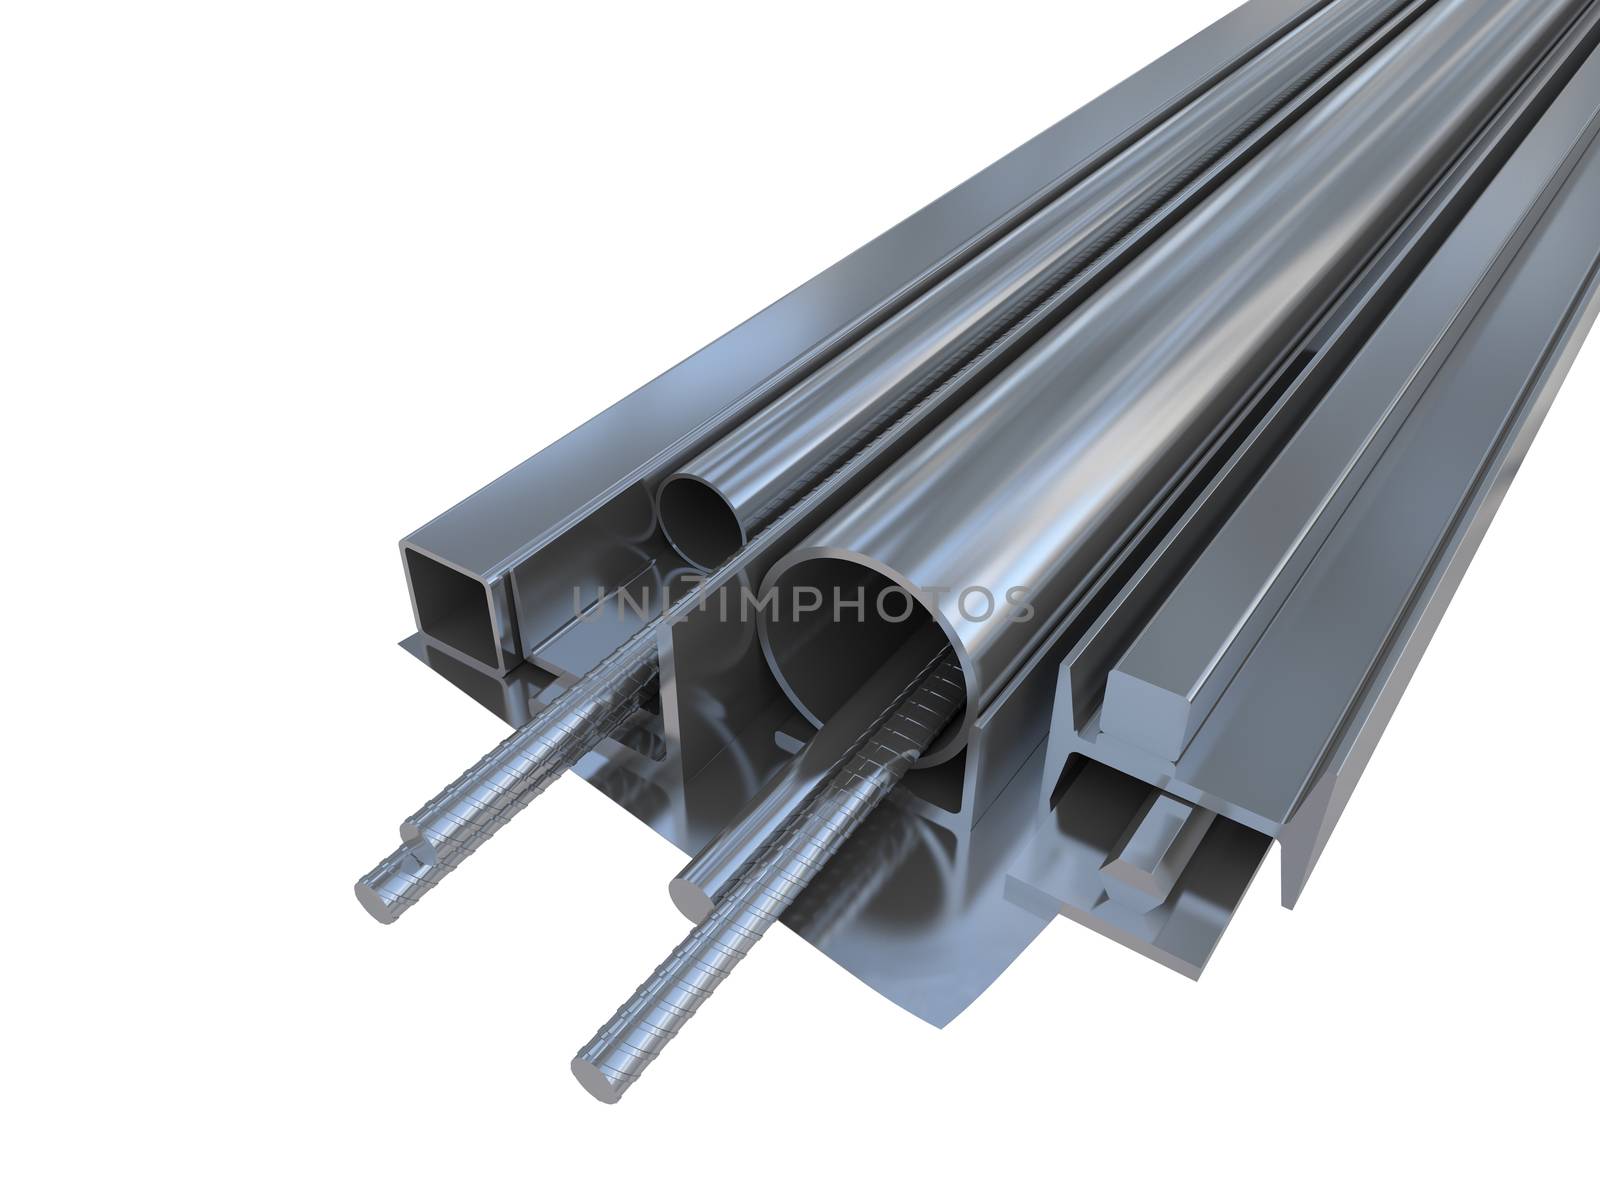 Black metal pipes, angles, channels, squares on white background. 3D rendering